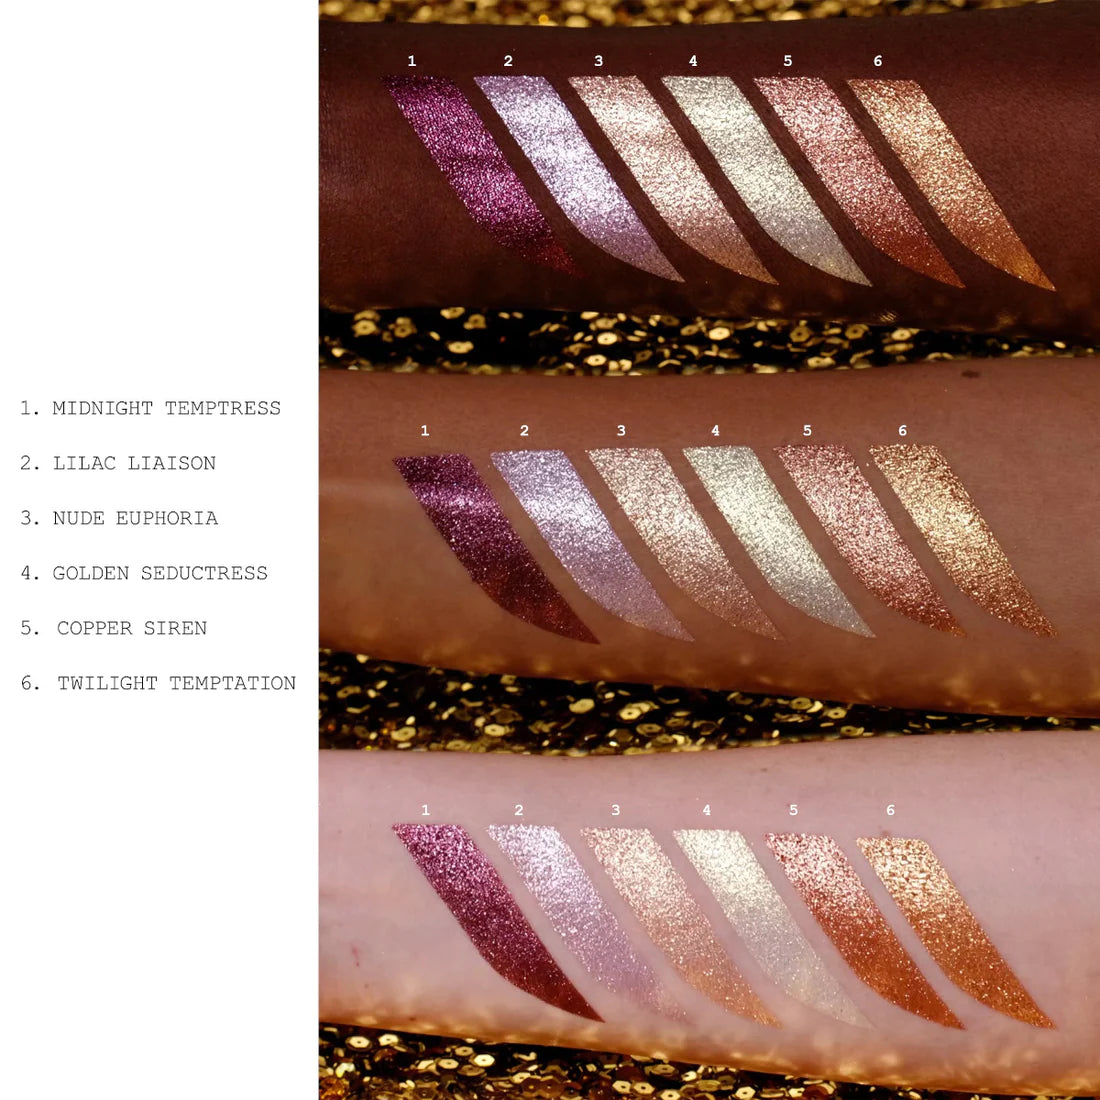 Load image into Gallery viewer, Pat McGrath ChromaLuxe Artistry Pigment Copper Siren (Soft Copper Metallic Shimmer)
